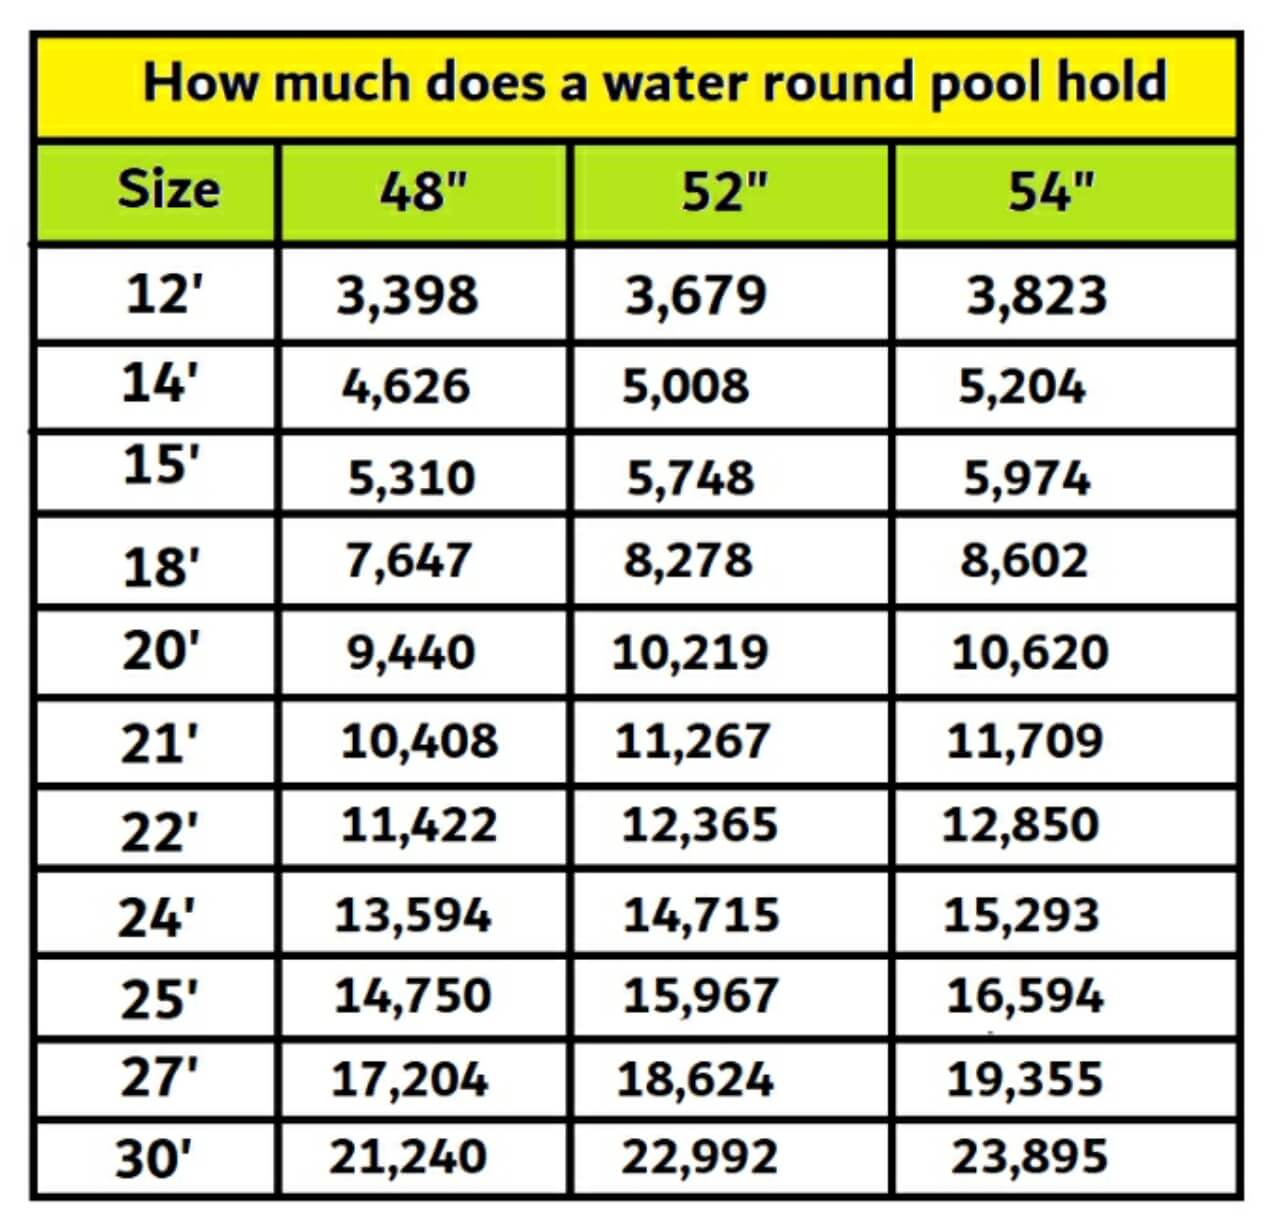 How much water does a round pool hold